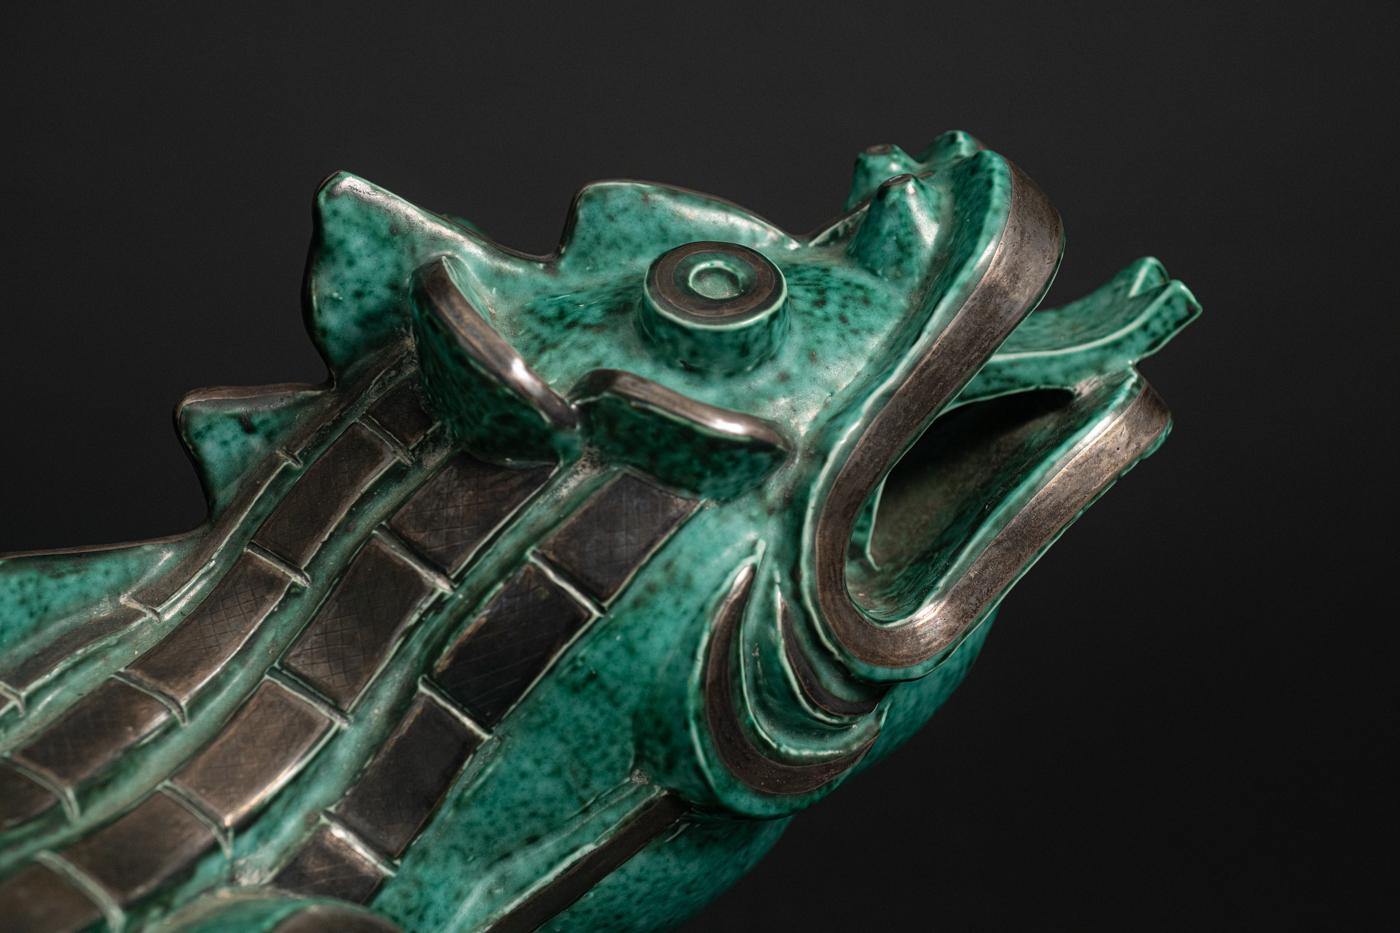 ARGENTA DRAGON, by Wilhelm Kåge (Swedish, 1889-1960), aqua green-glazed stoneware with sterling silver accents, mounted on a custom molded wood base, c. 1930, most likely an exhibition piece. The striking mottled aqua green glaze is an early example